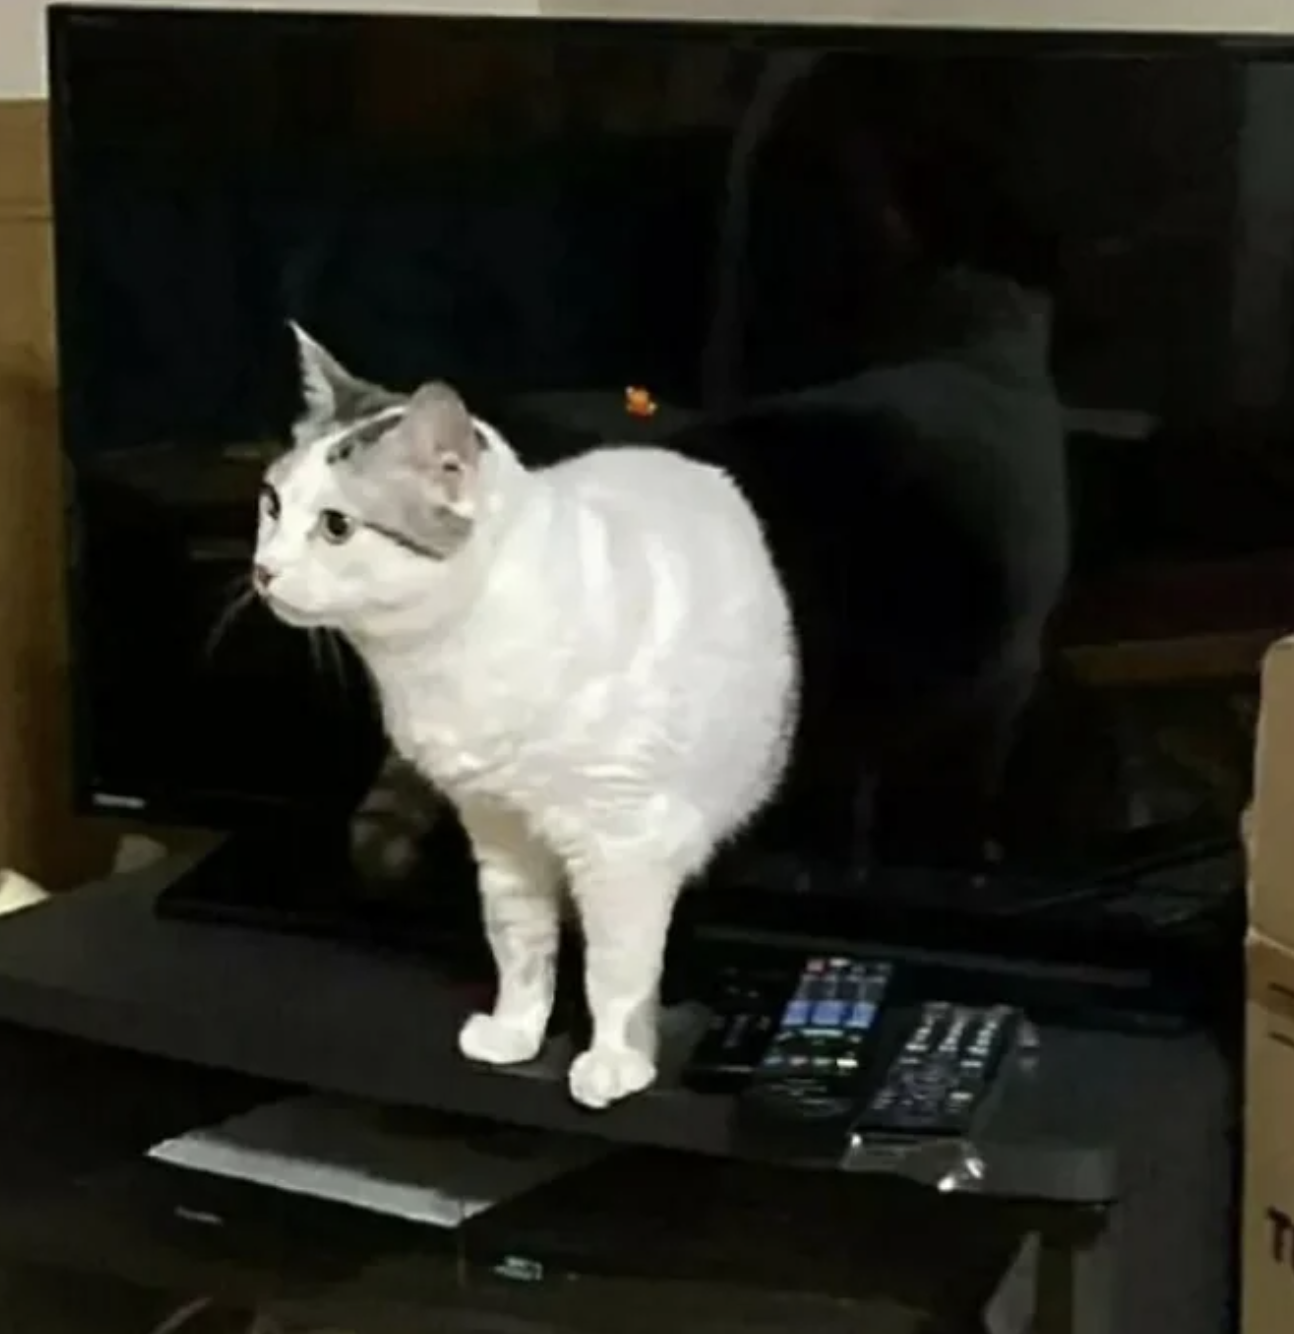 A white and black cat standing on an entertainment center in front of a flat-screen TV. Various remote controls and gadgets are on the table